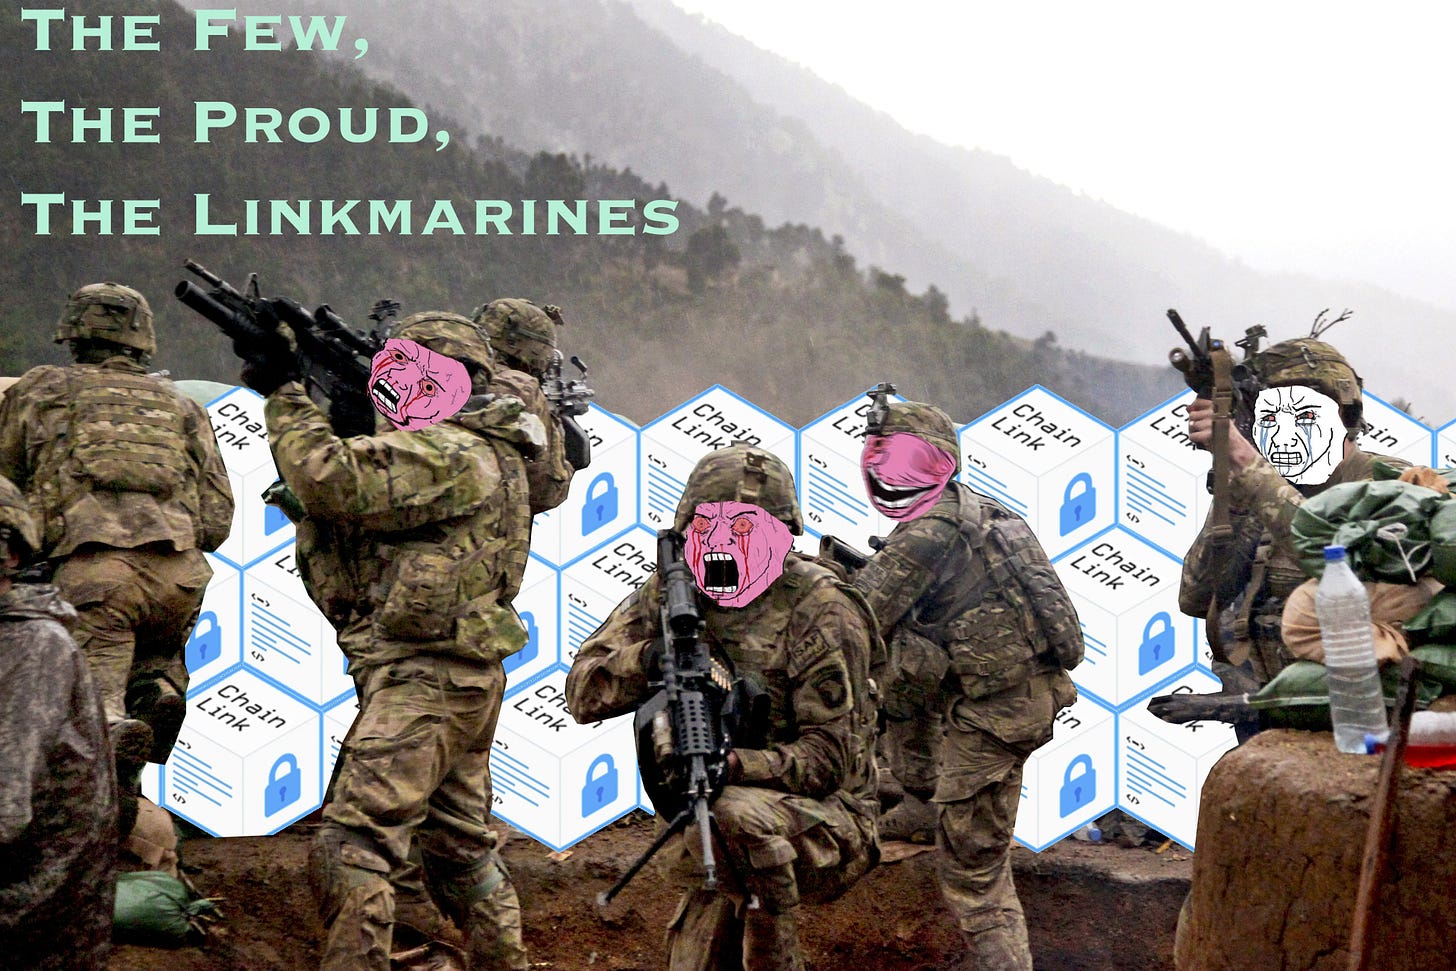 Lenny on Twitter: "$LINK marines defending their coin with their lives.  #crypto #memes #chainlink https://t.co/FOMCGOK5ap" / Twitter